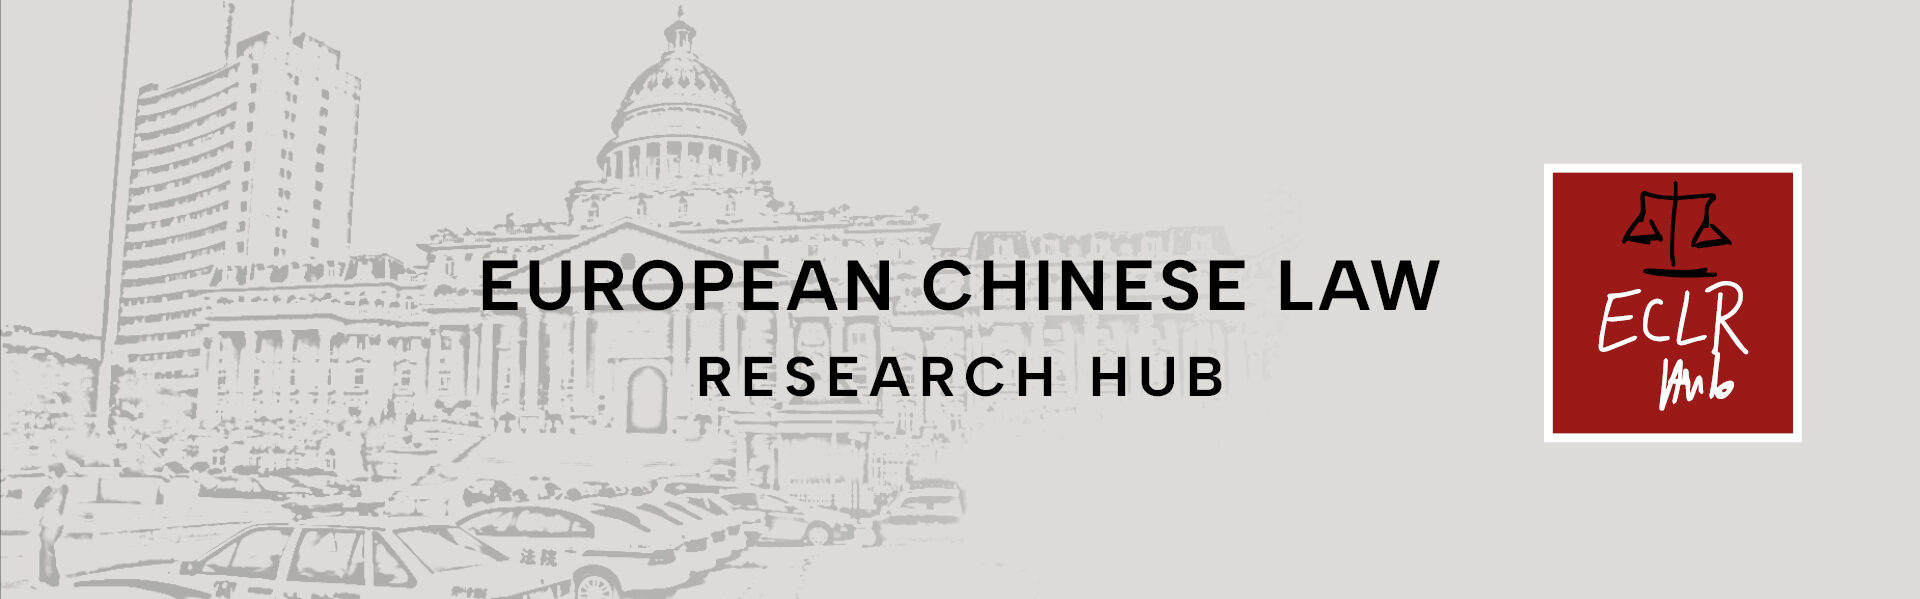 European Chinese Law Research Hub